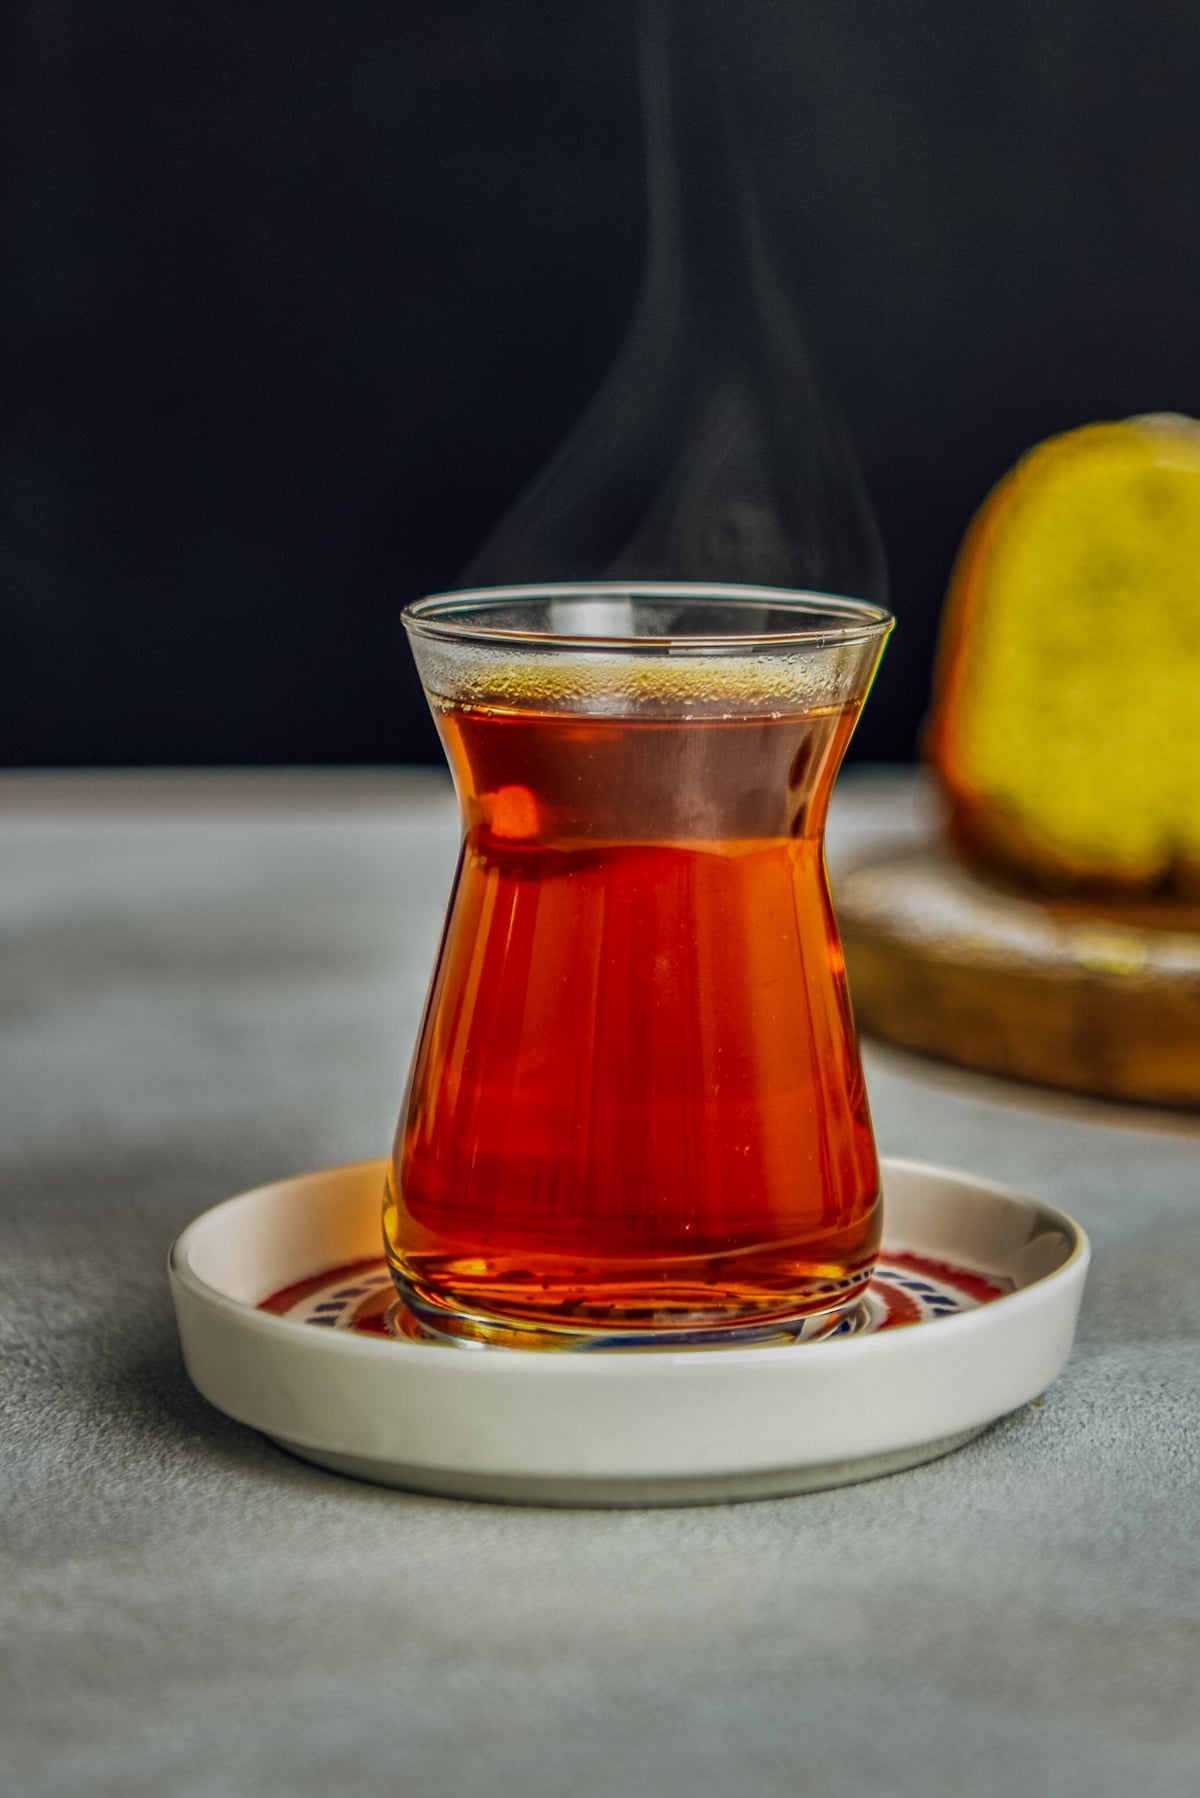 Hot Turkish tea in its traditional tea glass and saucer.